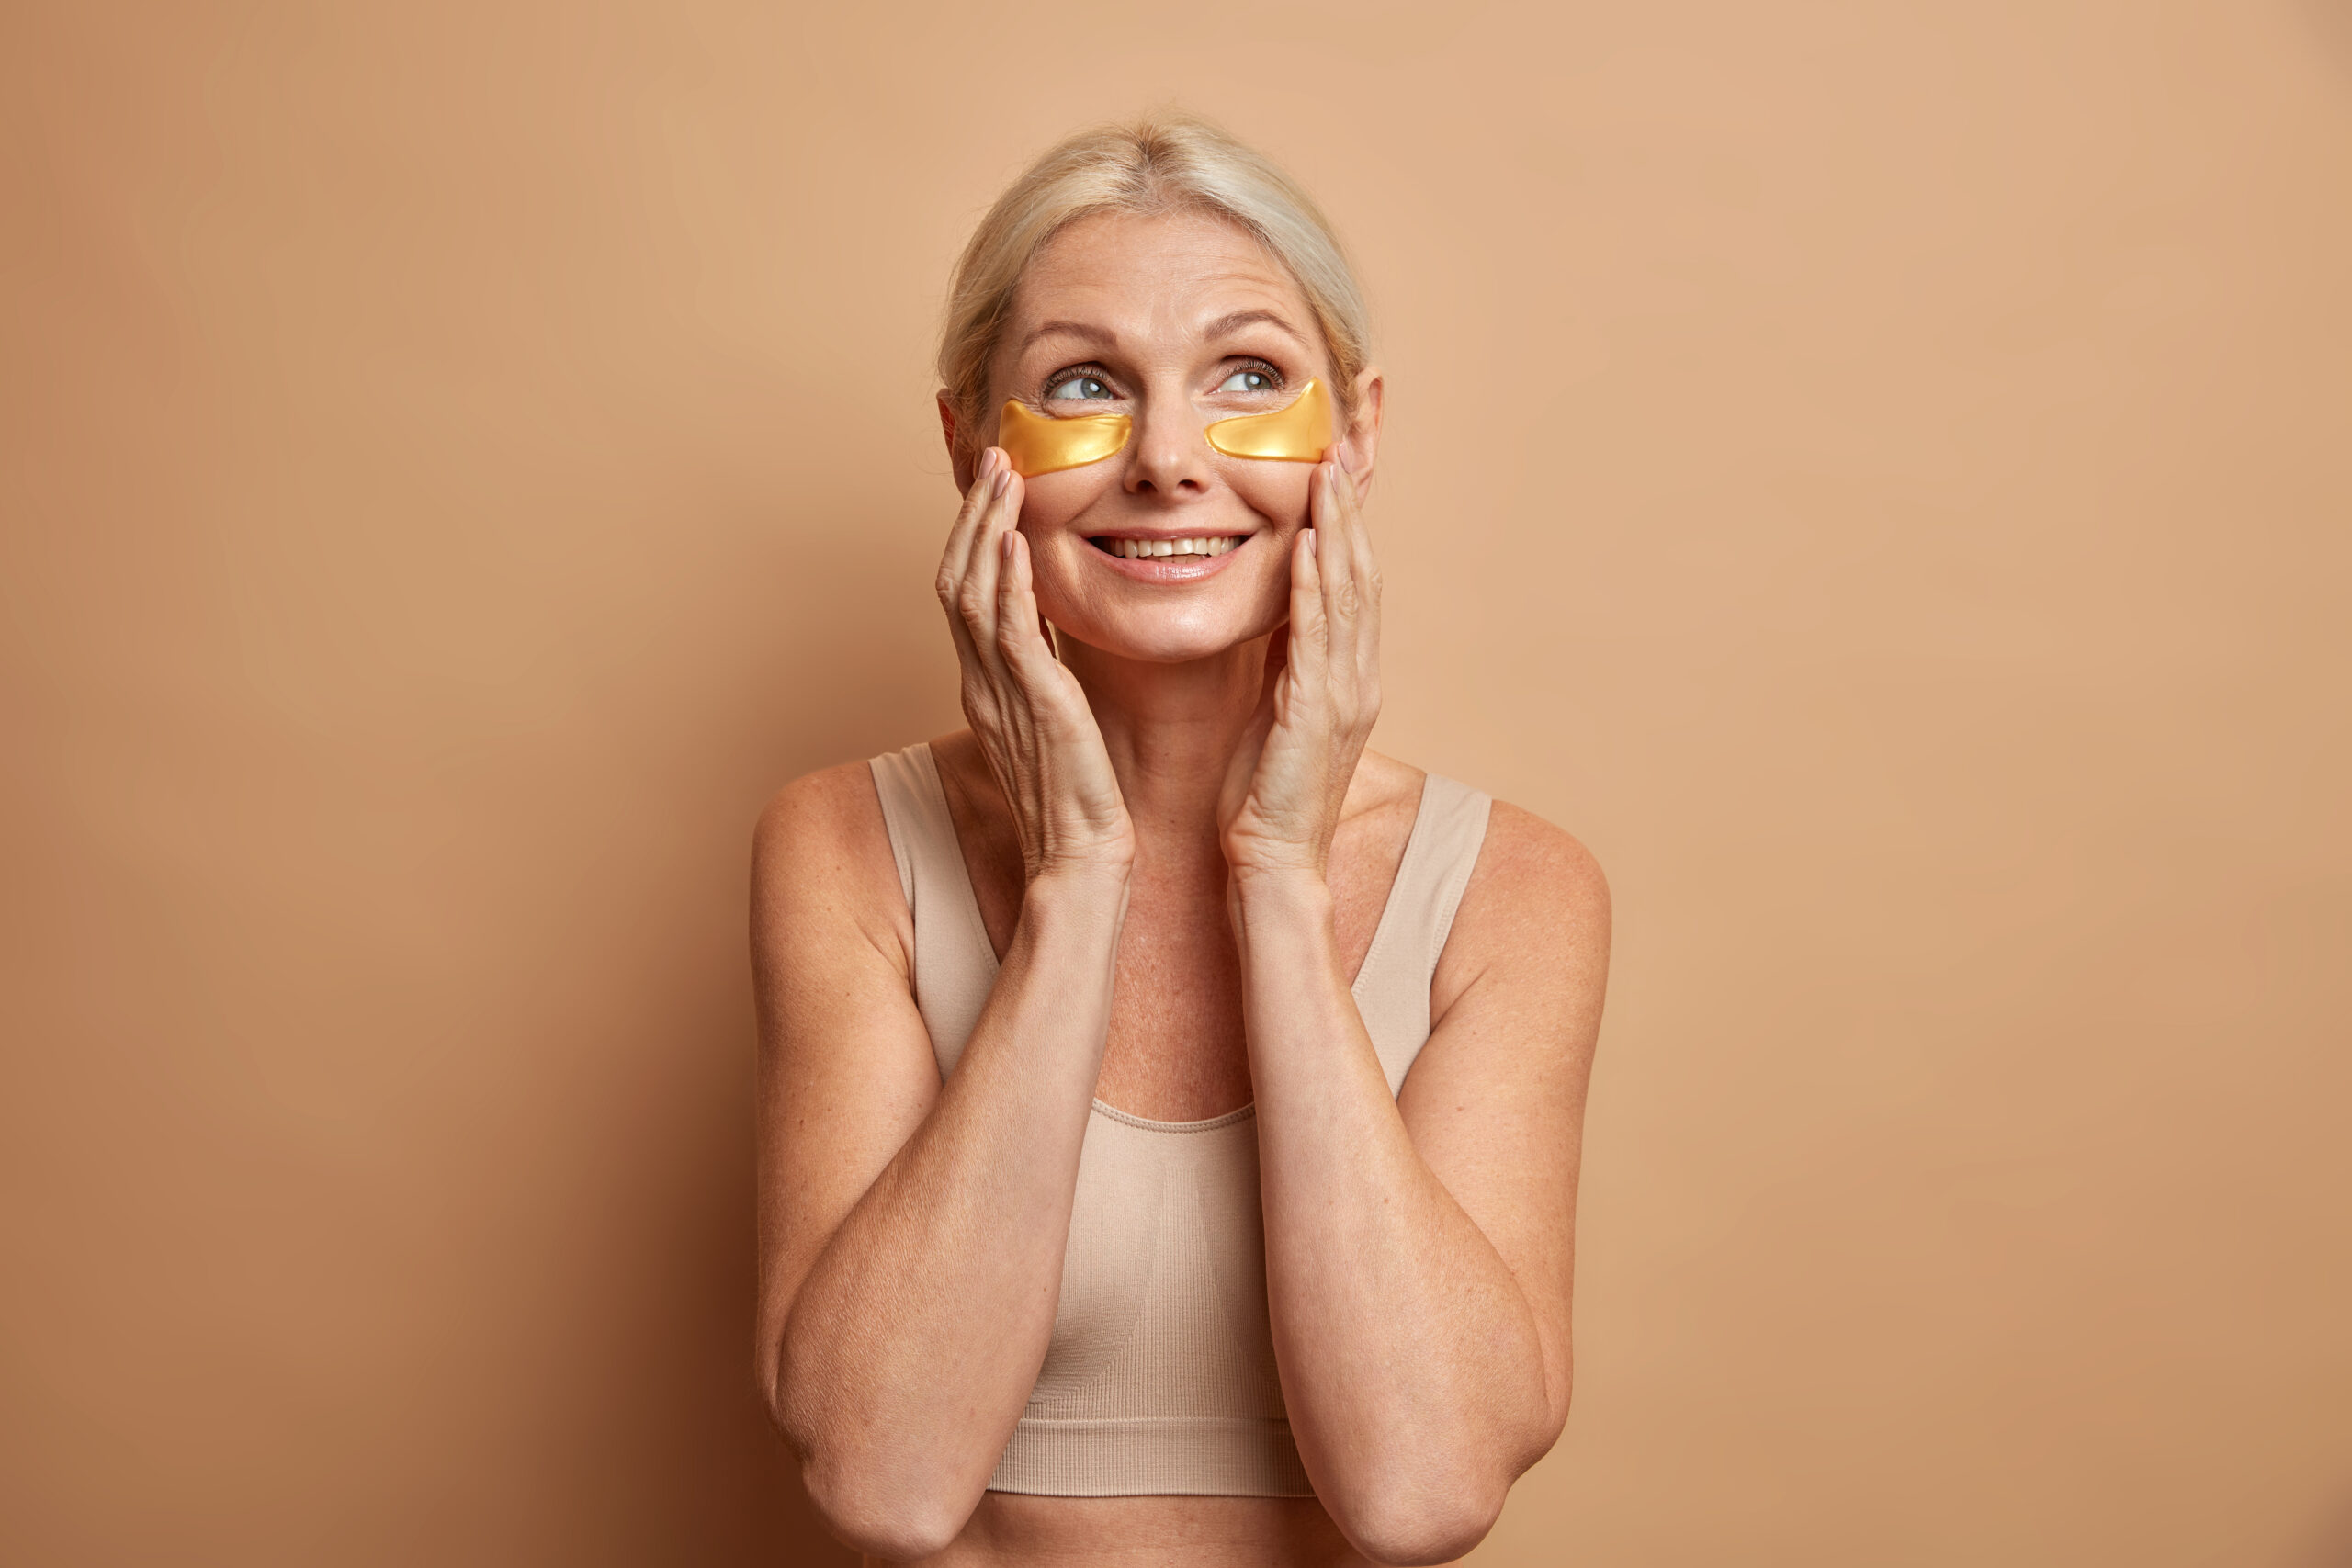 Waist up shot of glad middle aged blonde woman touches face gently applies collagen beauty patches under eyes has dreamy expression wears top poses against brown background. Facial care concept